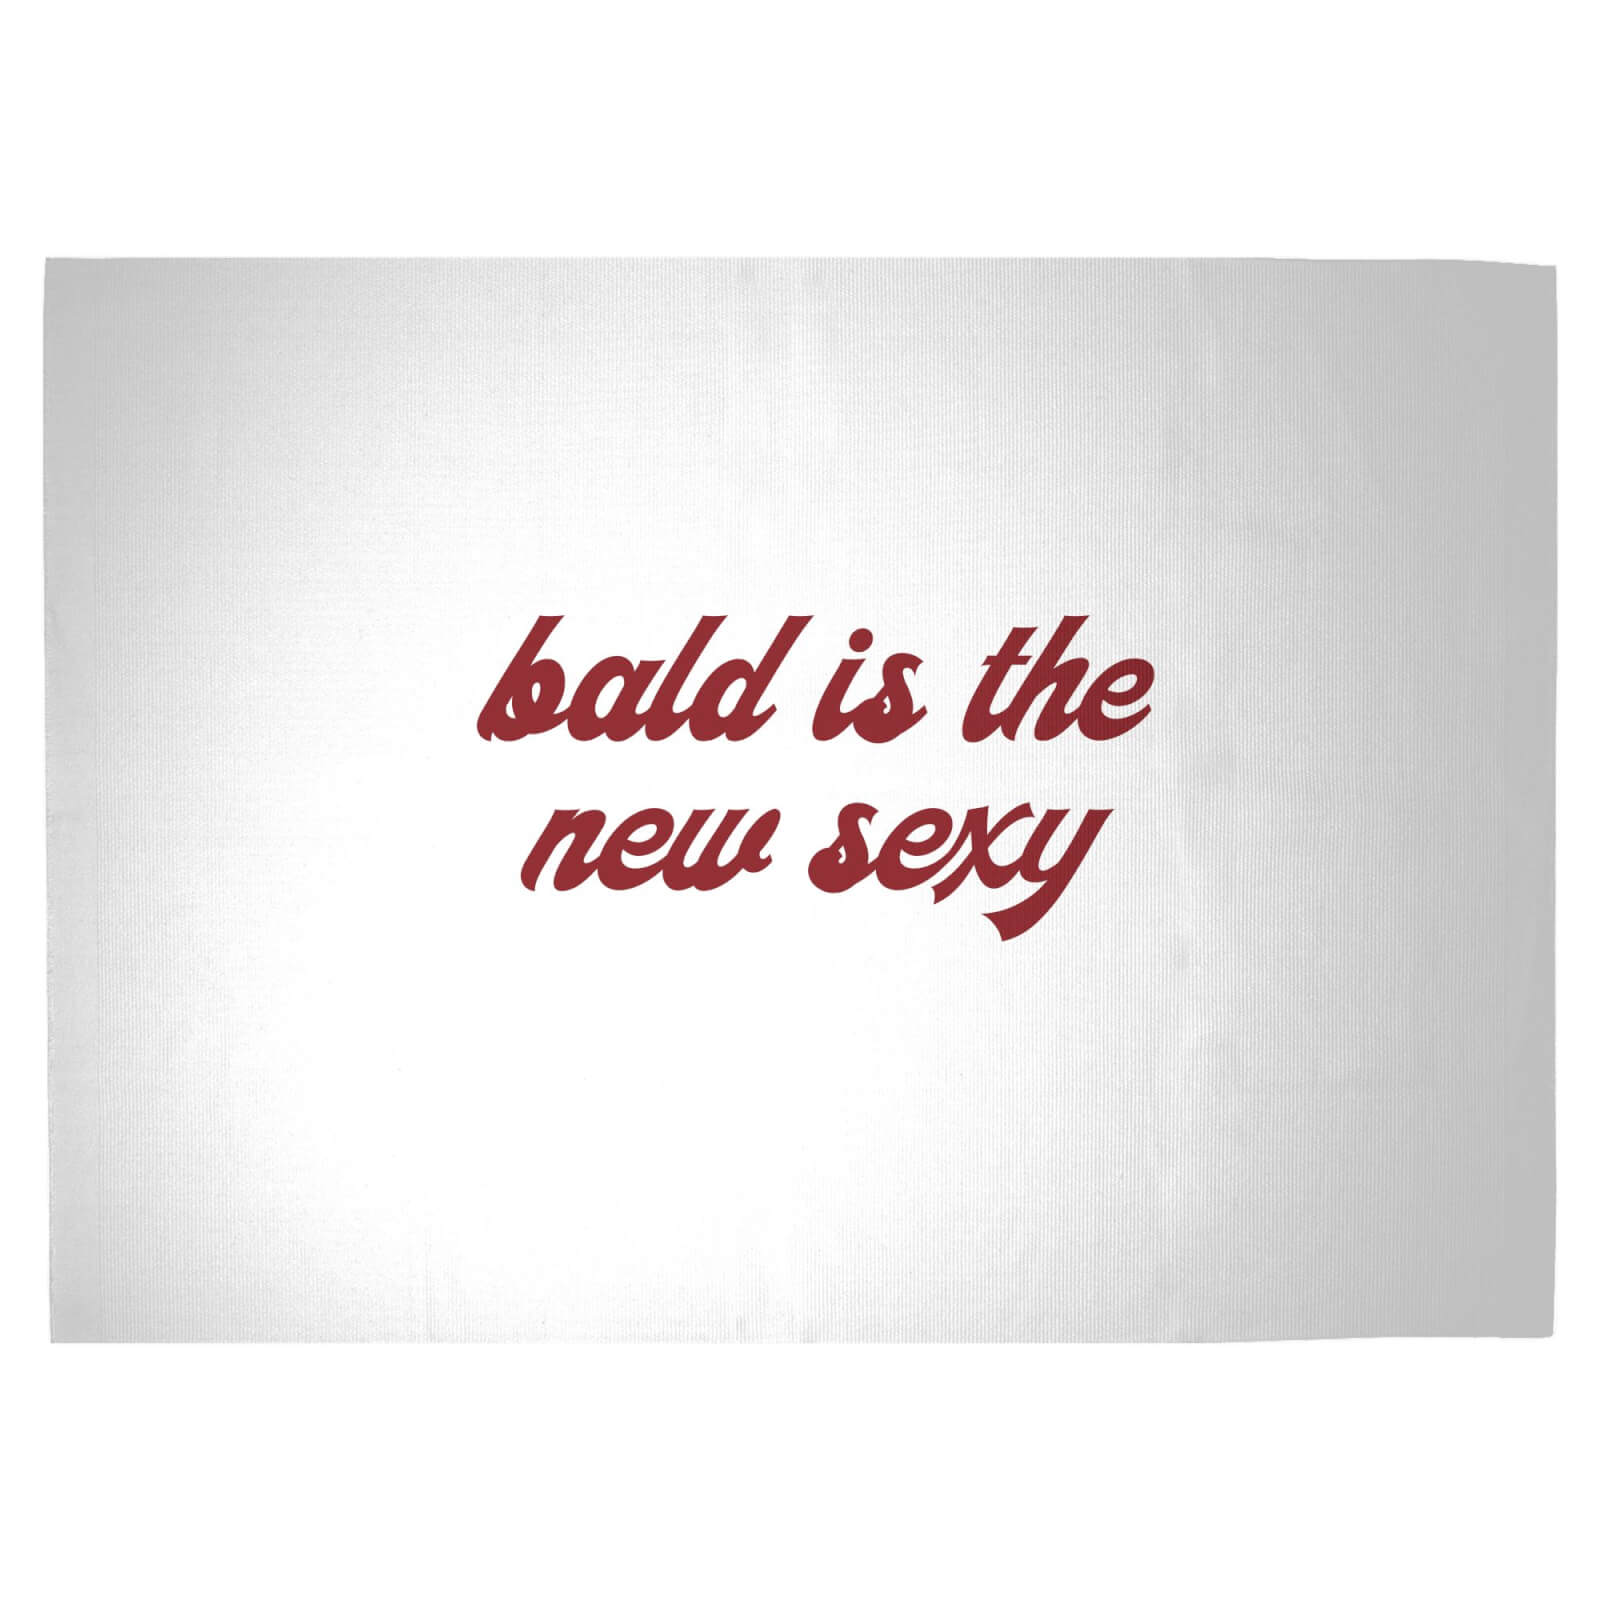 Bald Is The New Sexy Woven Rug - Large